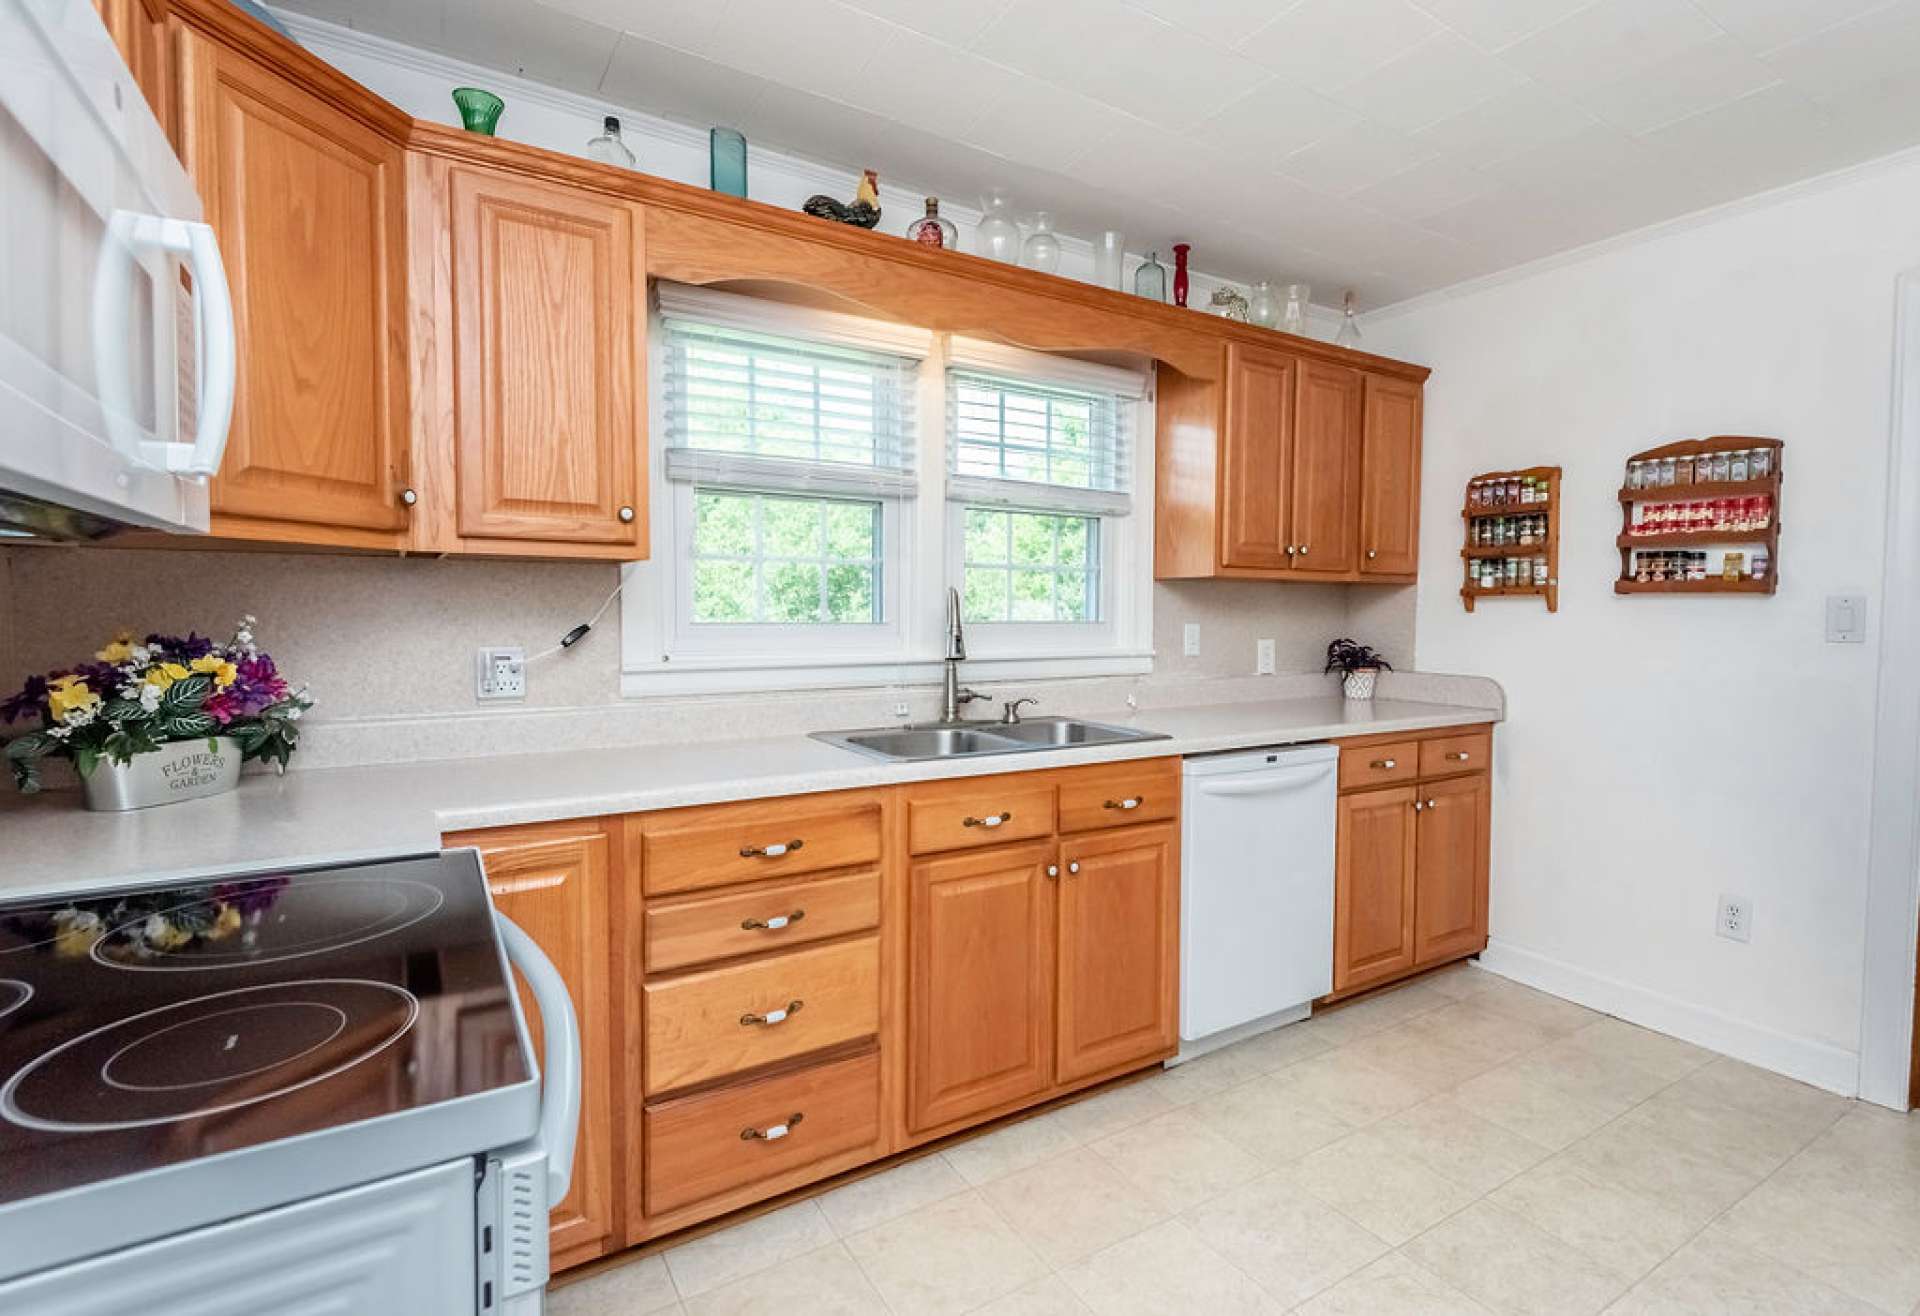 Kitchen has newer stove, microwave and dishwasher.